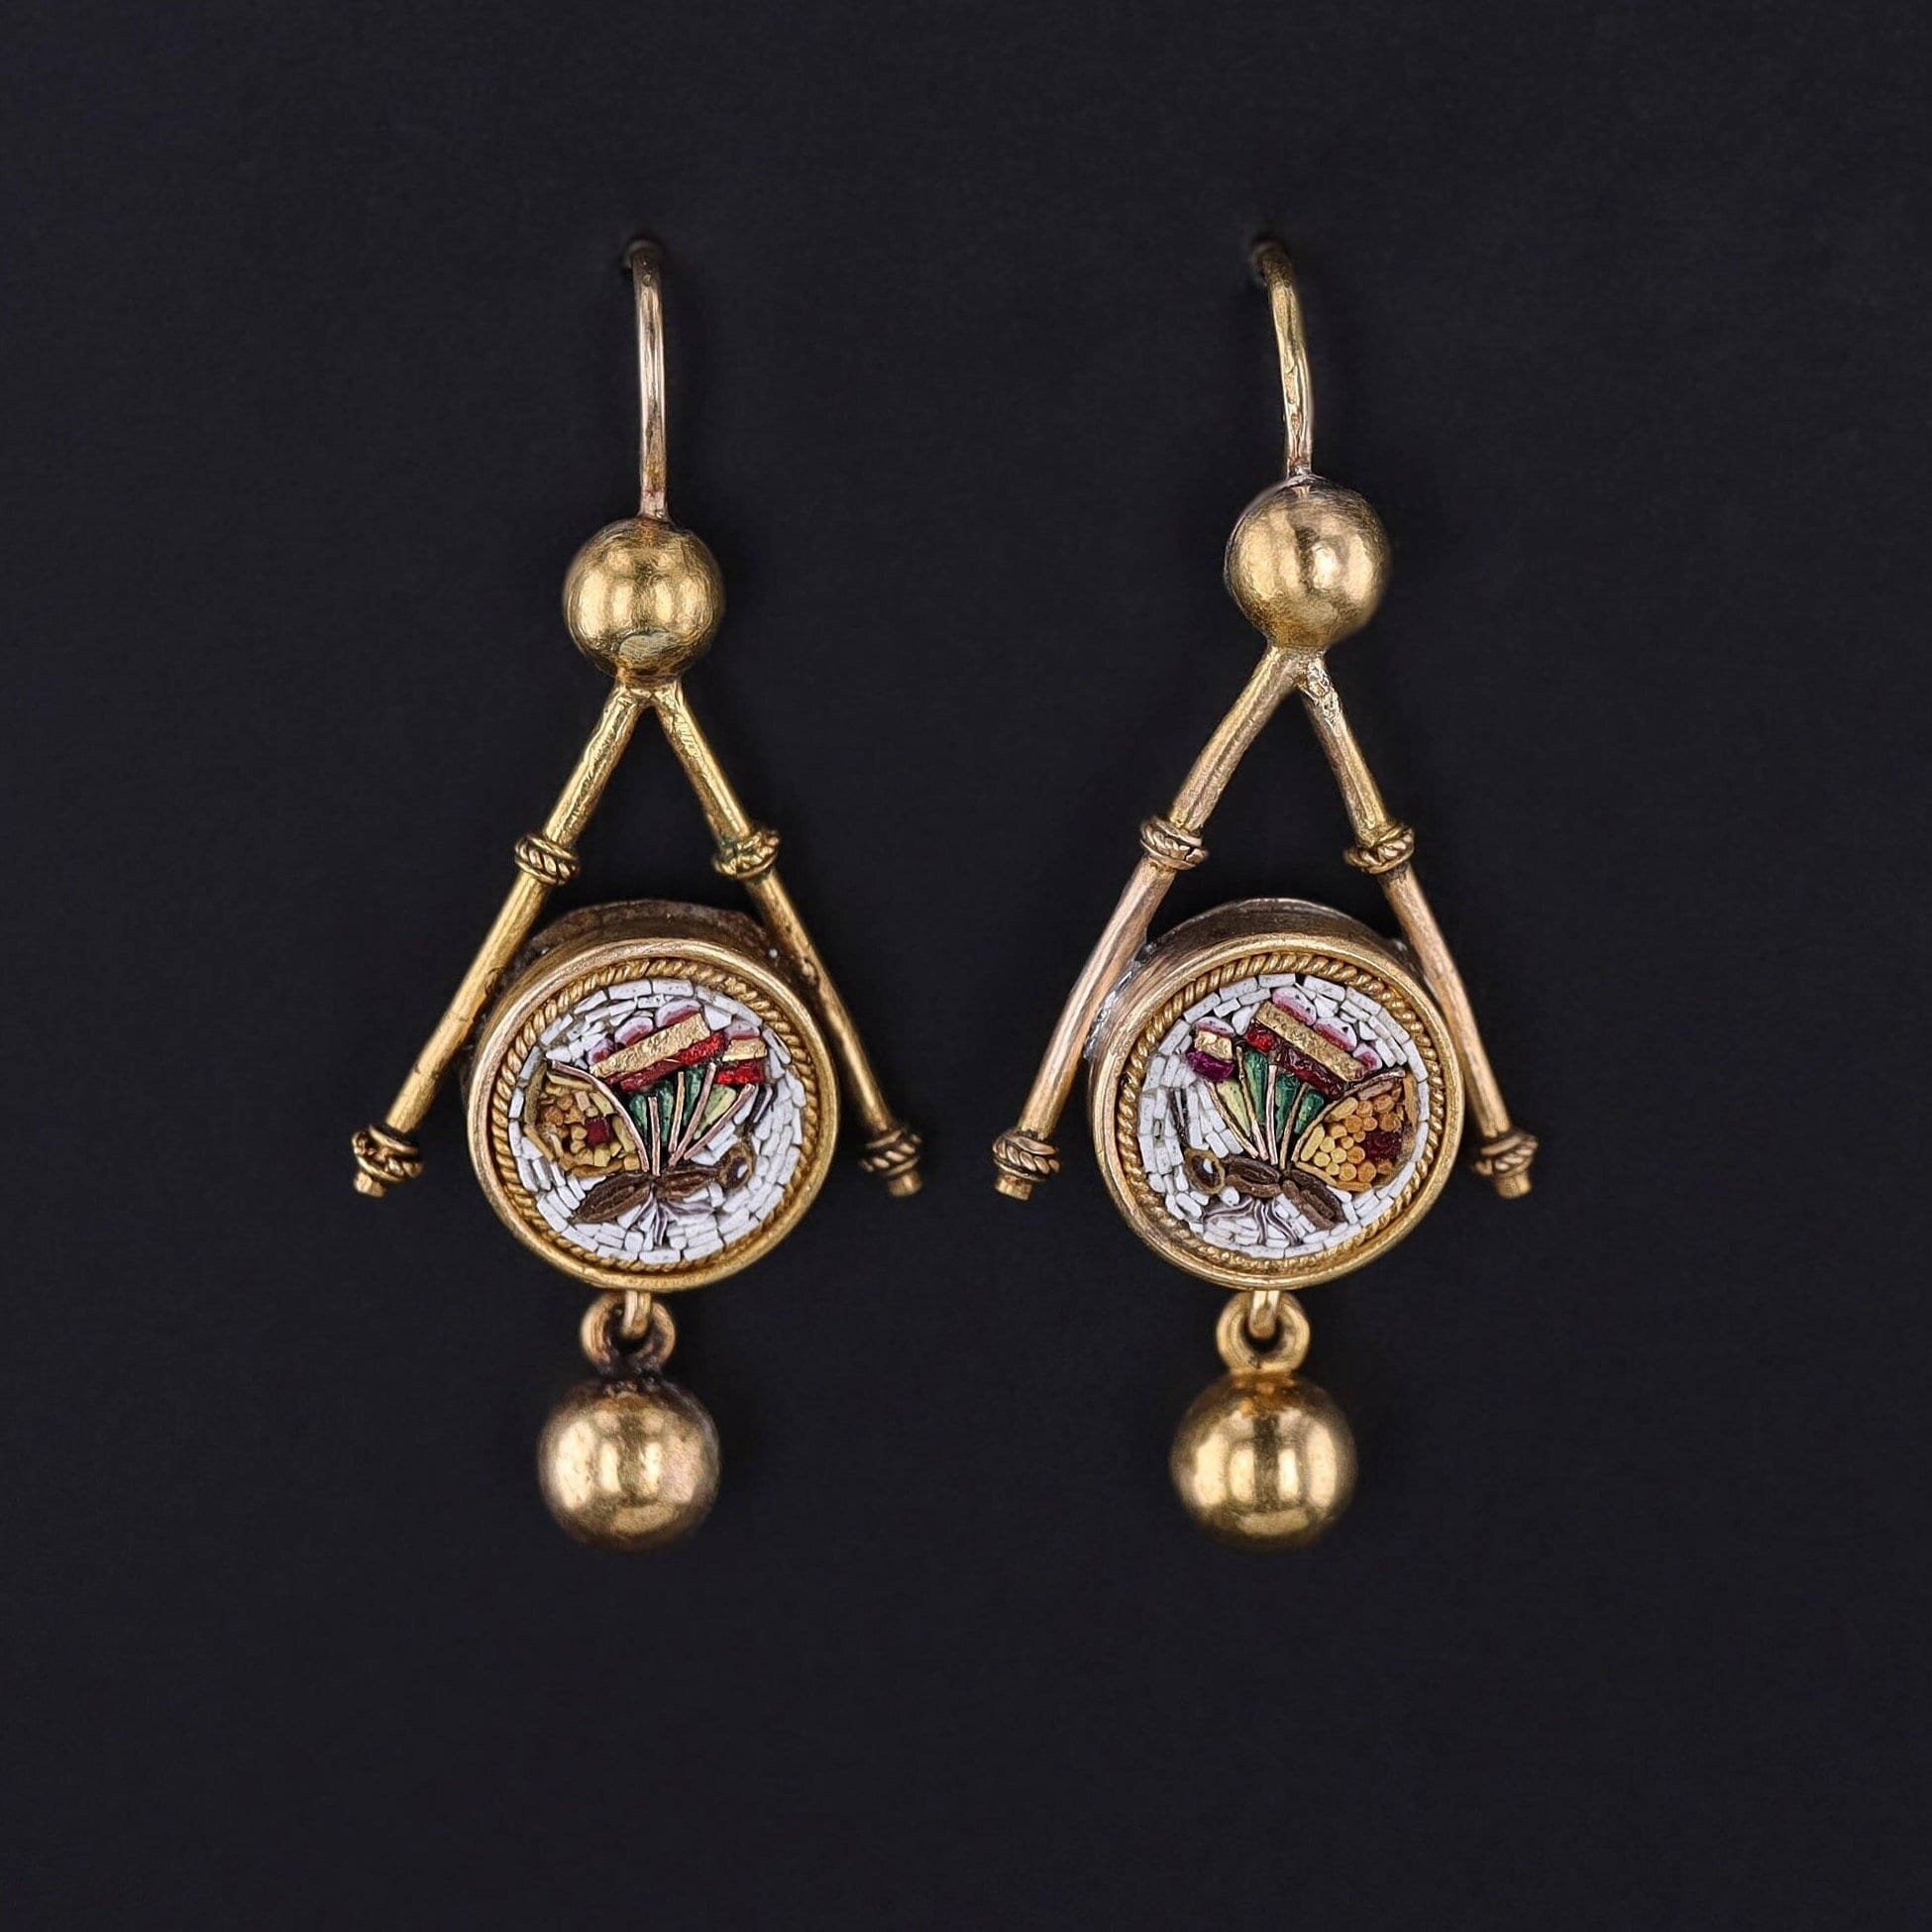 Antique Micromosaic Butterfly Earrings of 18k Gold